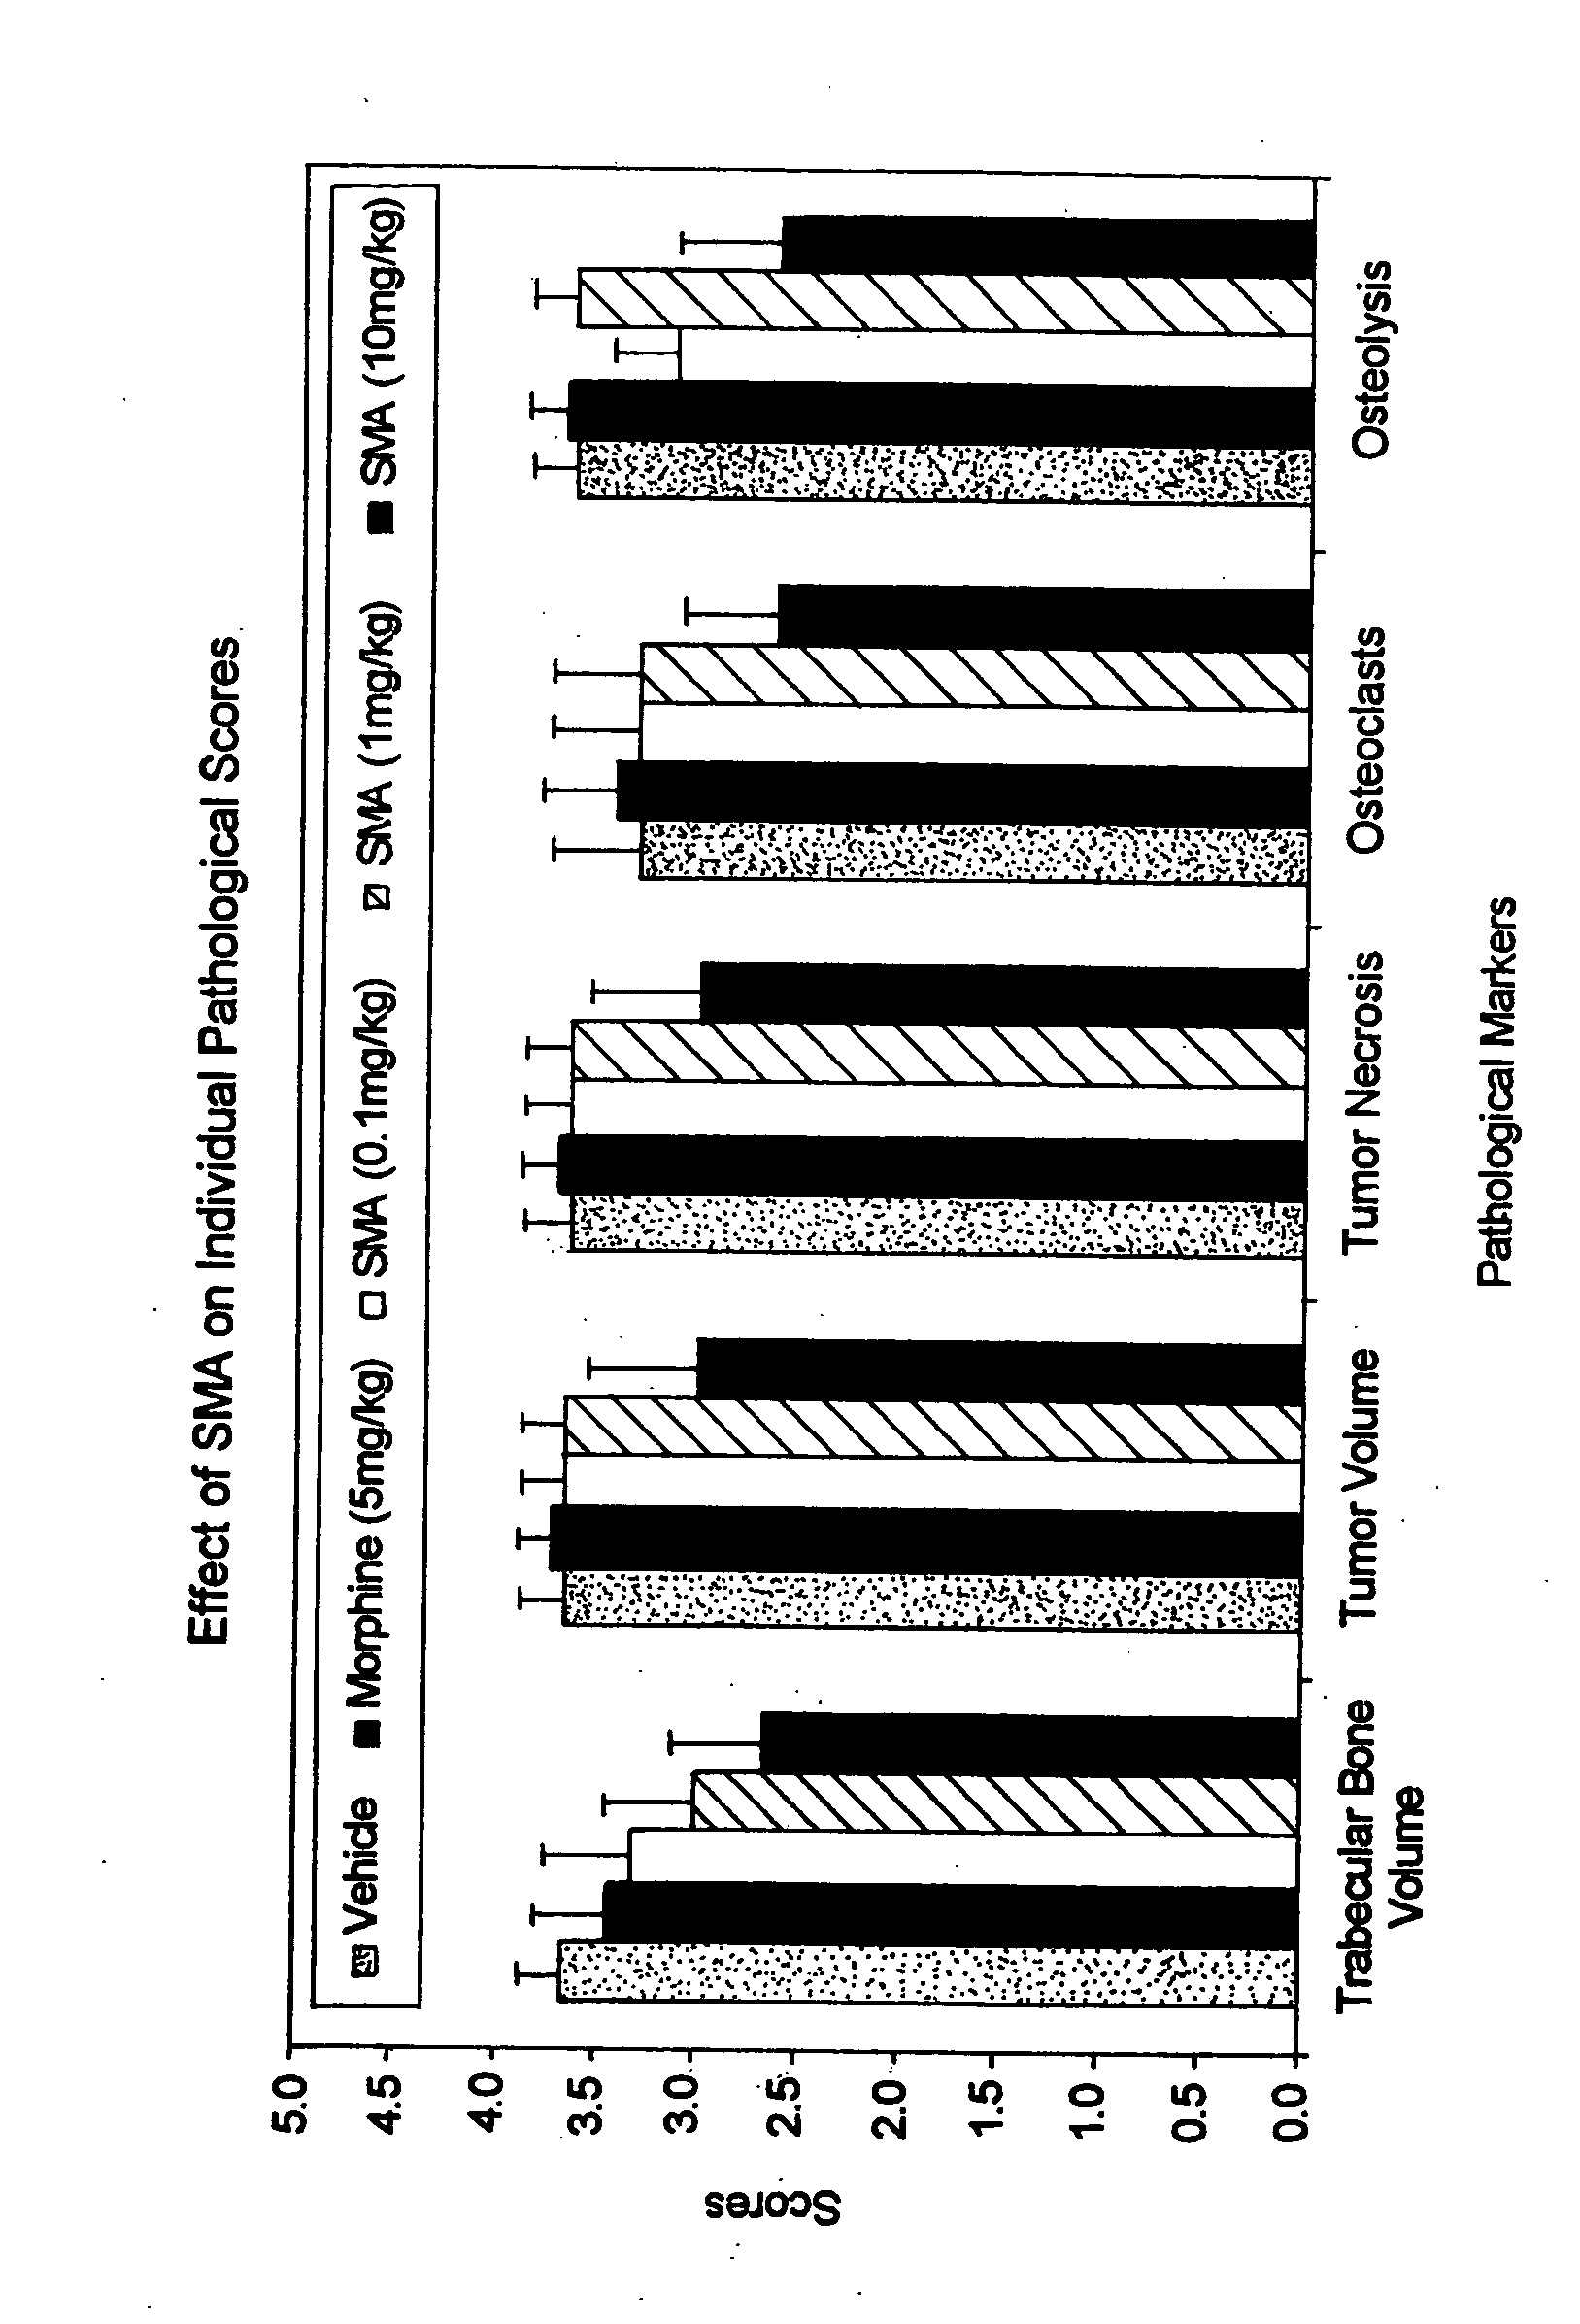 Use of arsenic compounds for treatment of pain and inflammation